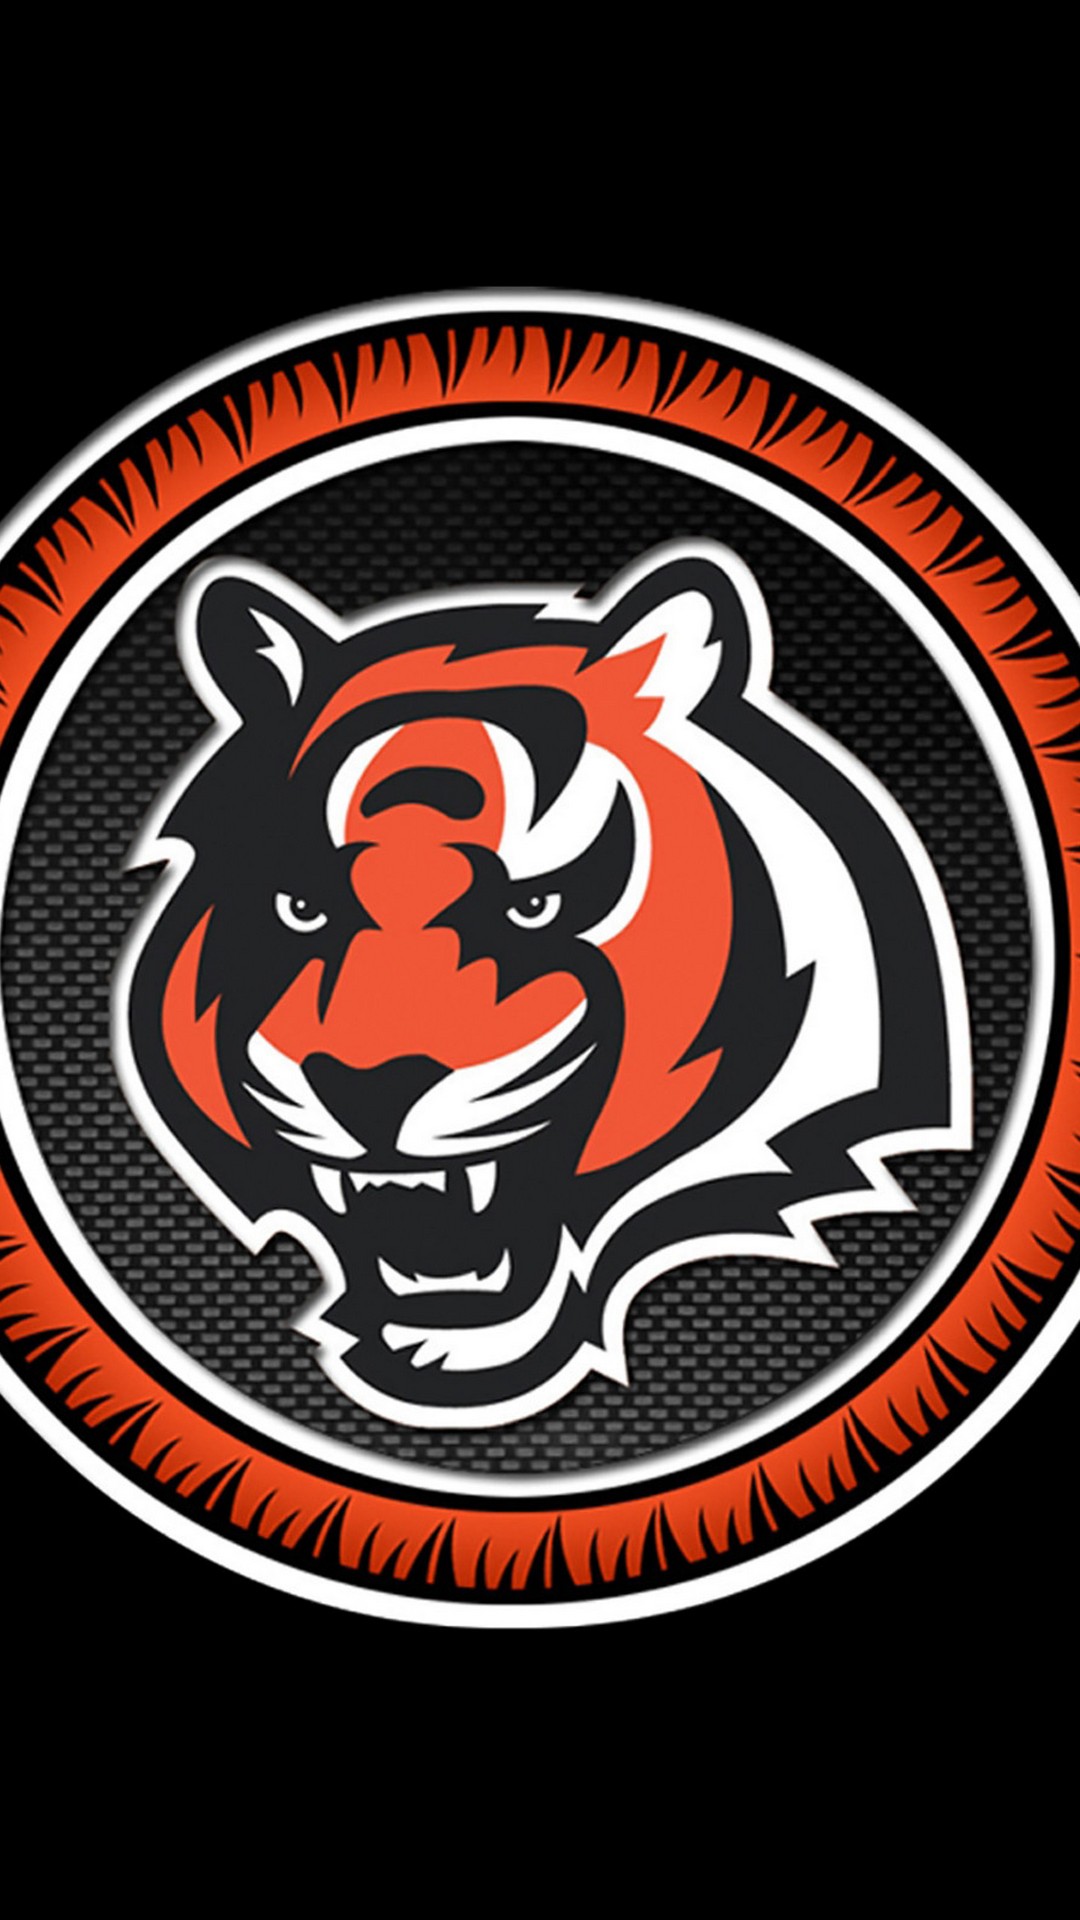 Cincinnati Bengals iPhone 8 Plus Wallpaper with high-resolution 1080x1920 pixel. Download and set as wallpaper for Apple iPhone X, XS Max, XR, 8, 7, 6, SE, iPad, Android